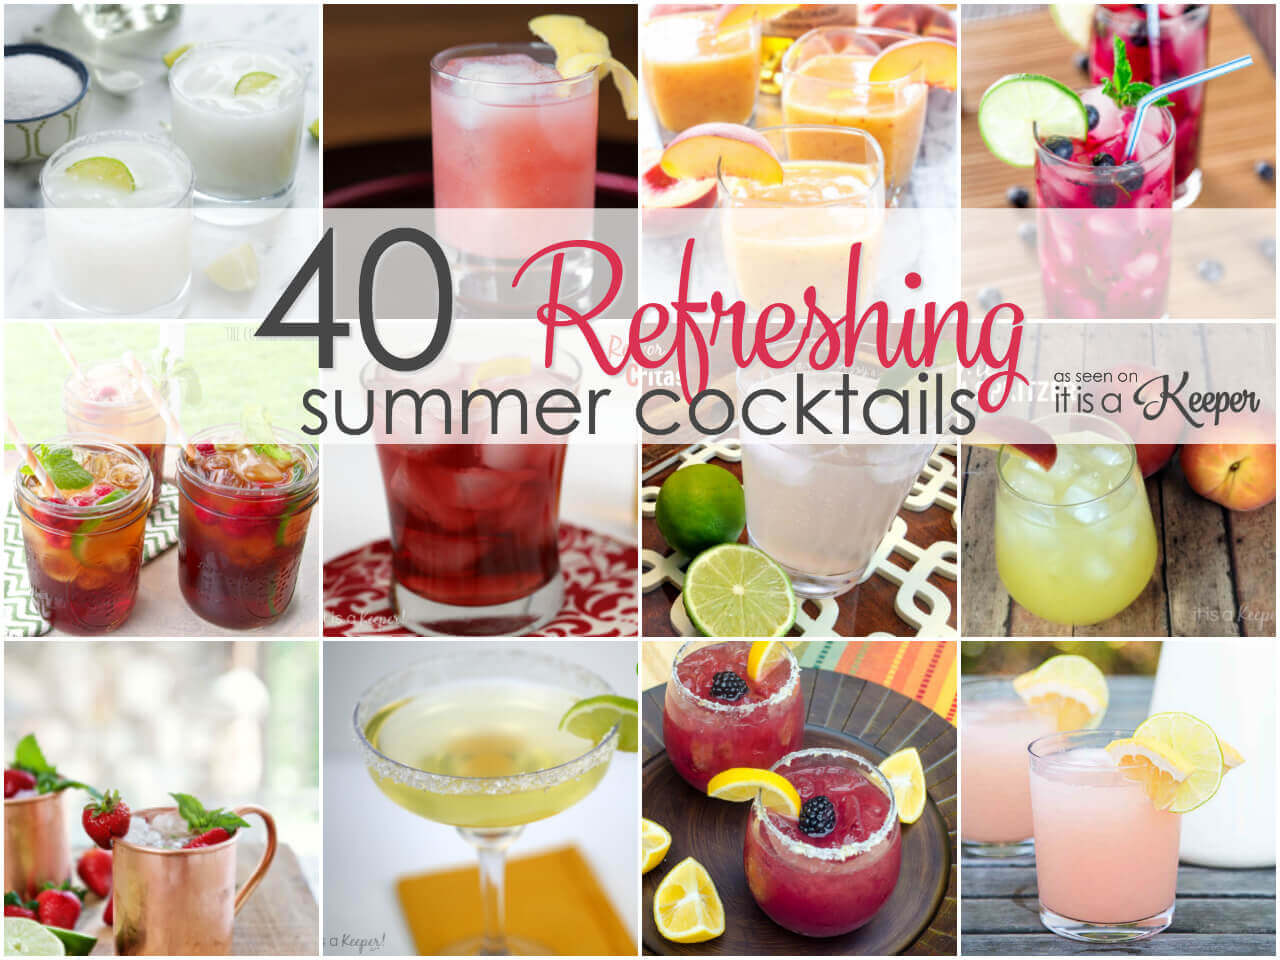 40 Summer Cocktail Recipes - Kick back and relax with these 40 simple cocktail recipes for summer